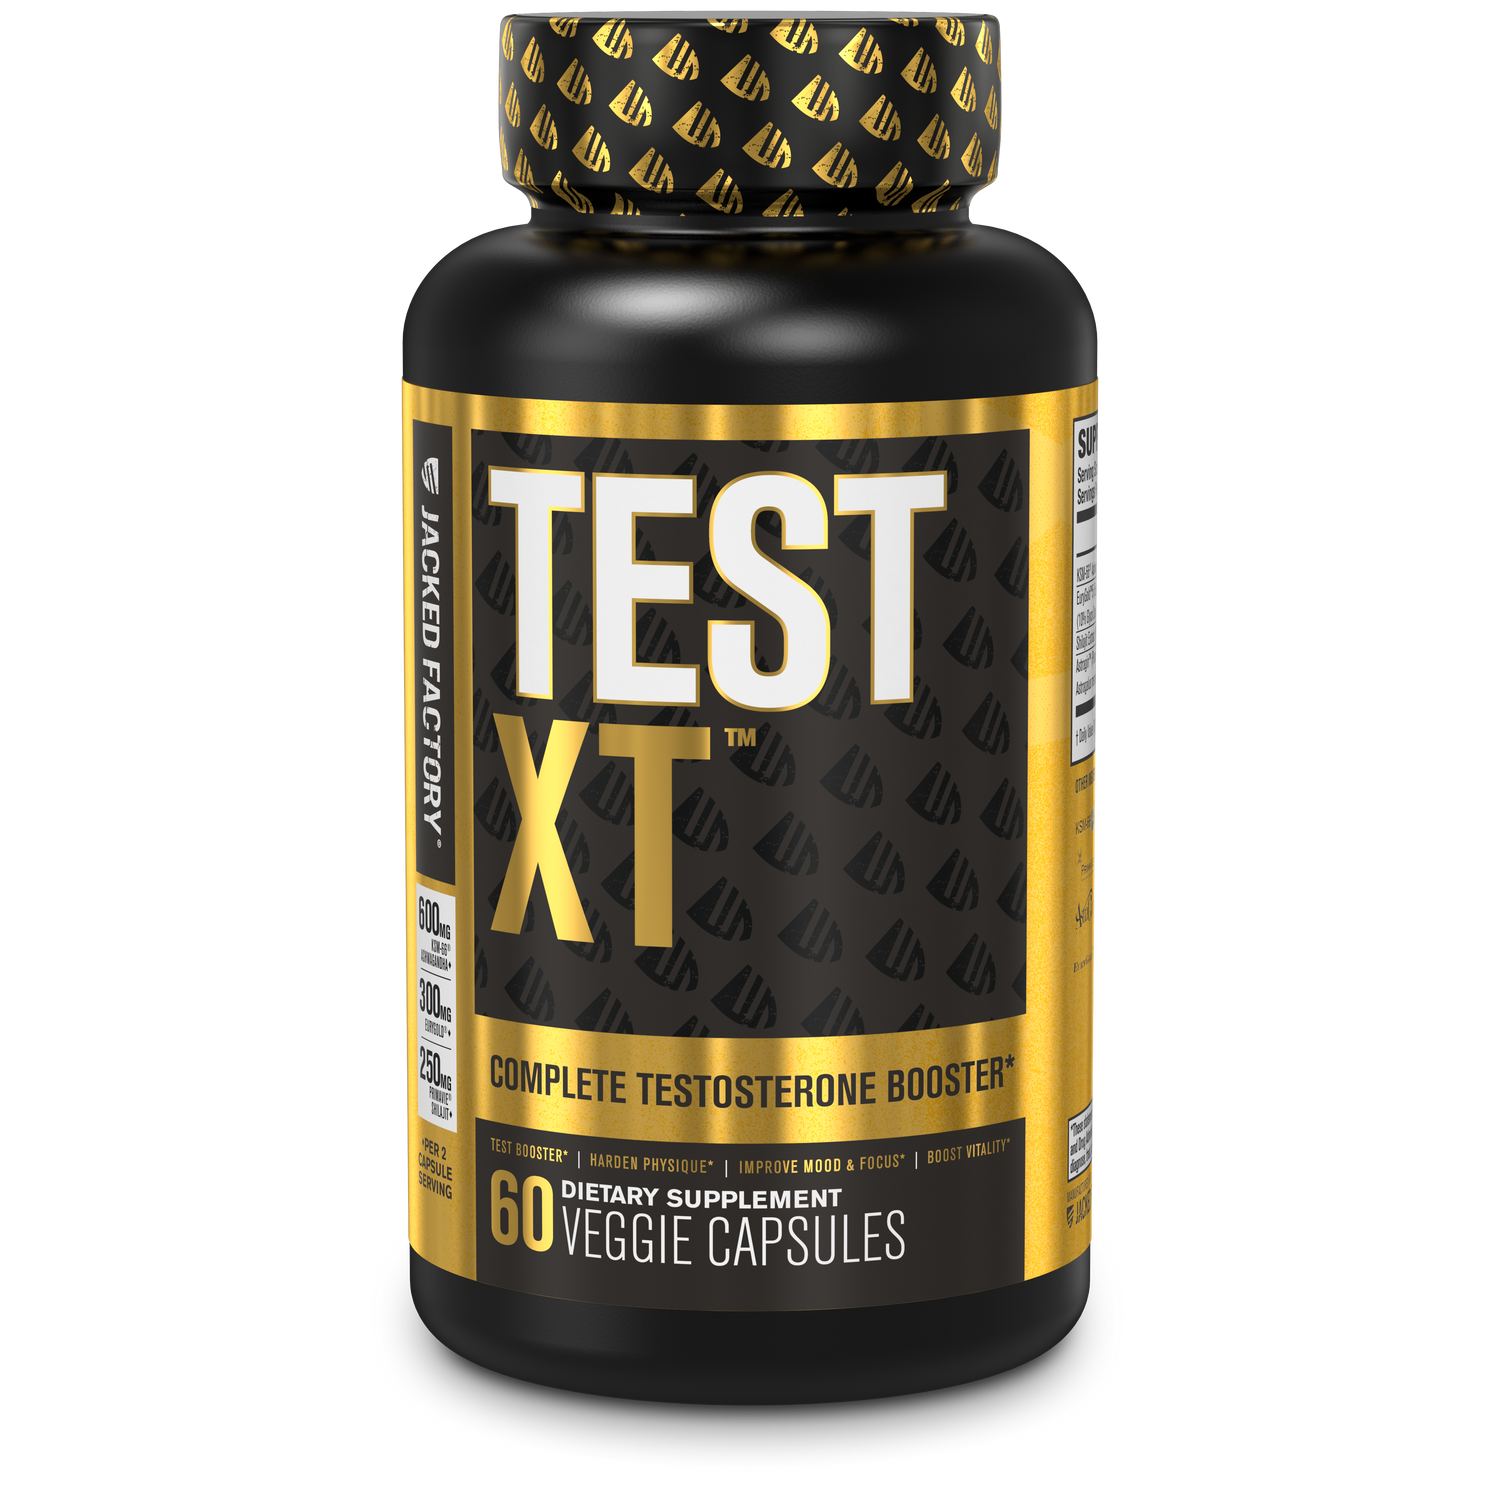 Jacked Factory's Test XT Black (60 veggie capsules) in a black bottle with a gold and white label